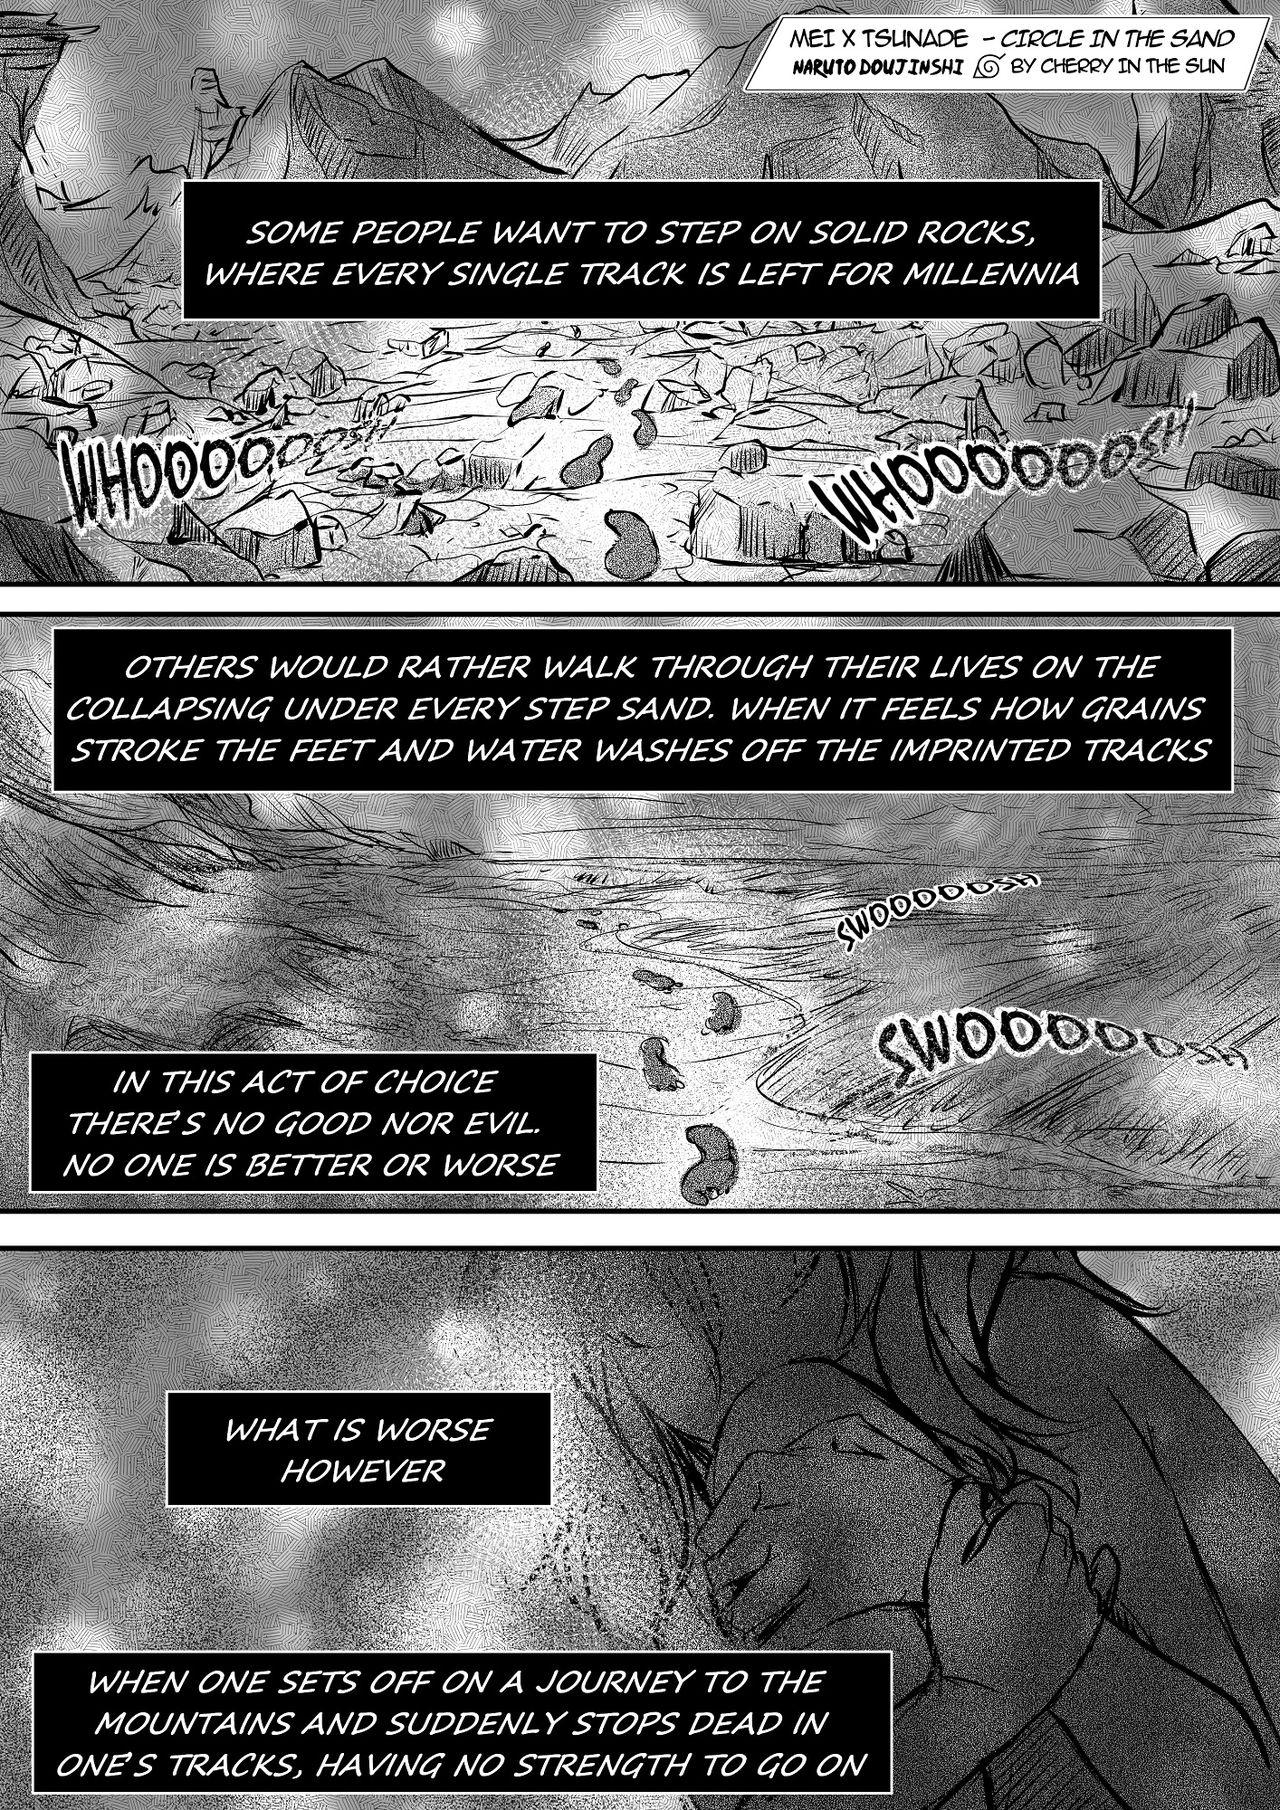 Stepsister Circle in the Sand - Naruto Cougar - Page 2